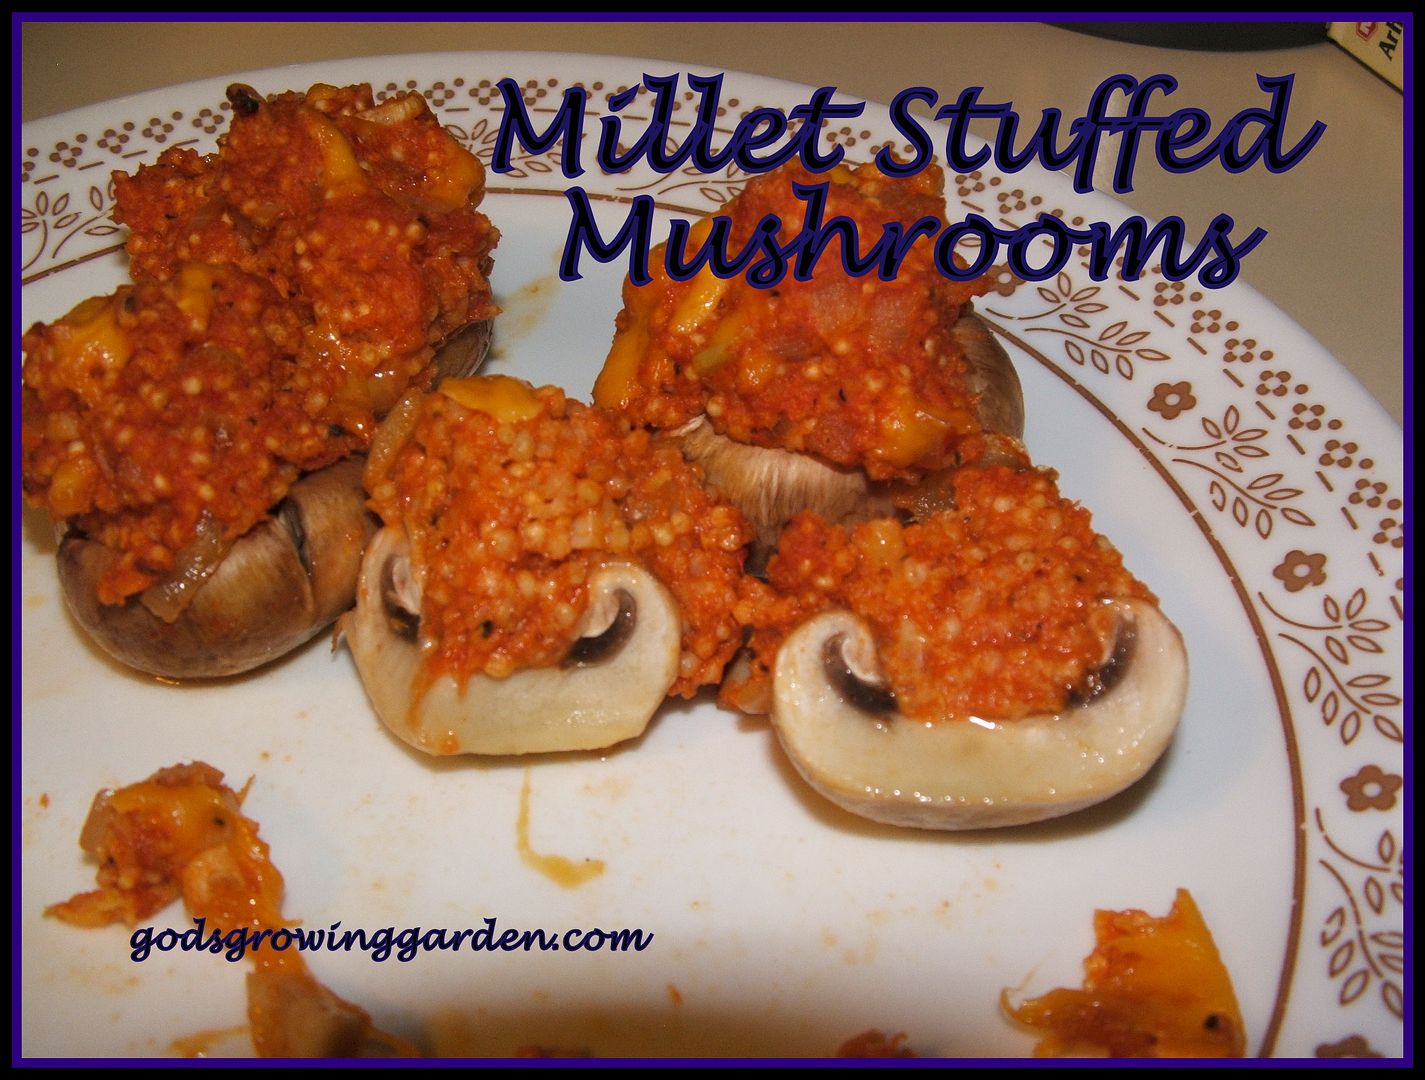 Millet Stuffed Mushrooms, by Angie Ouellette-Tower for godsgrowinggarden.com